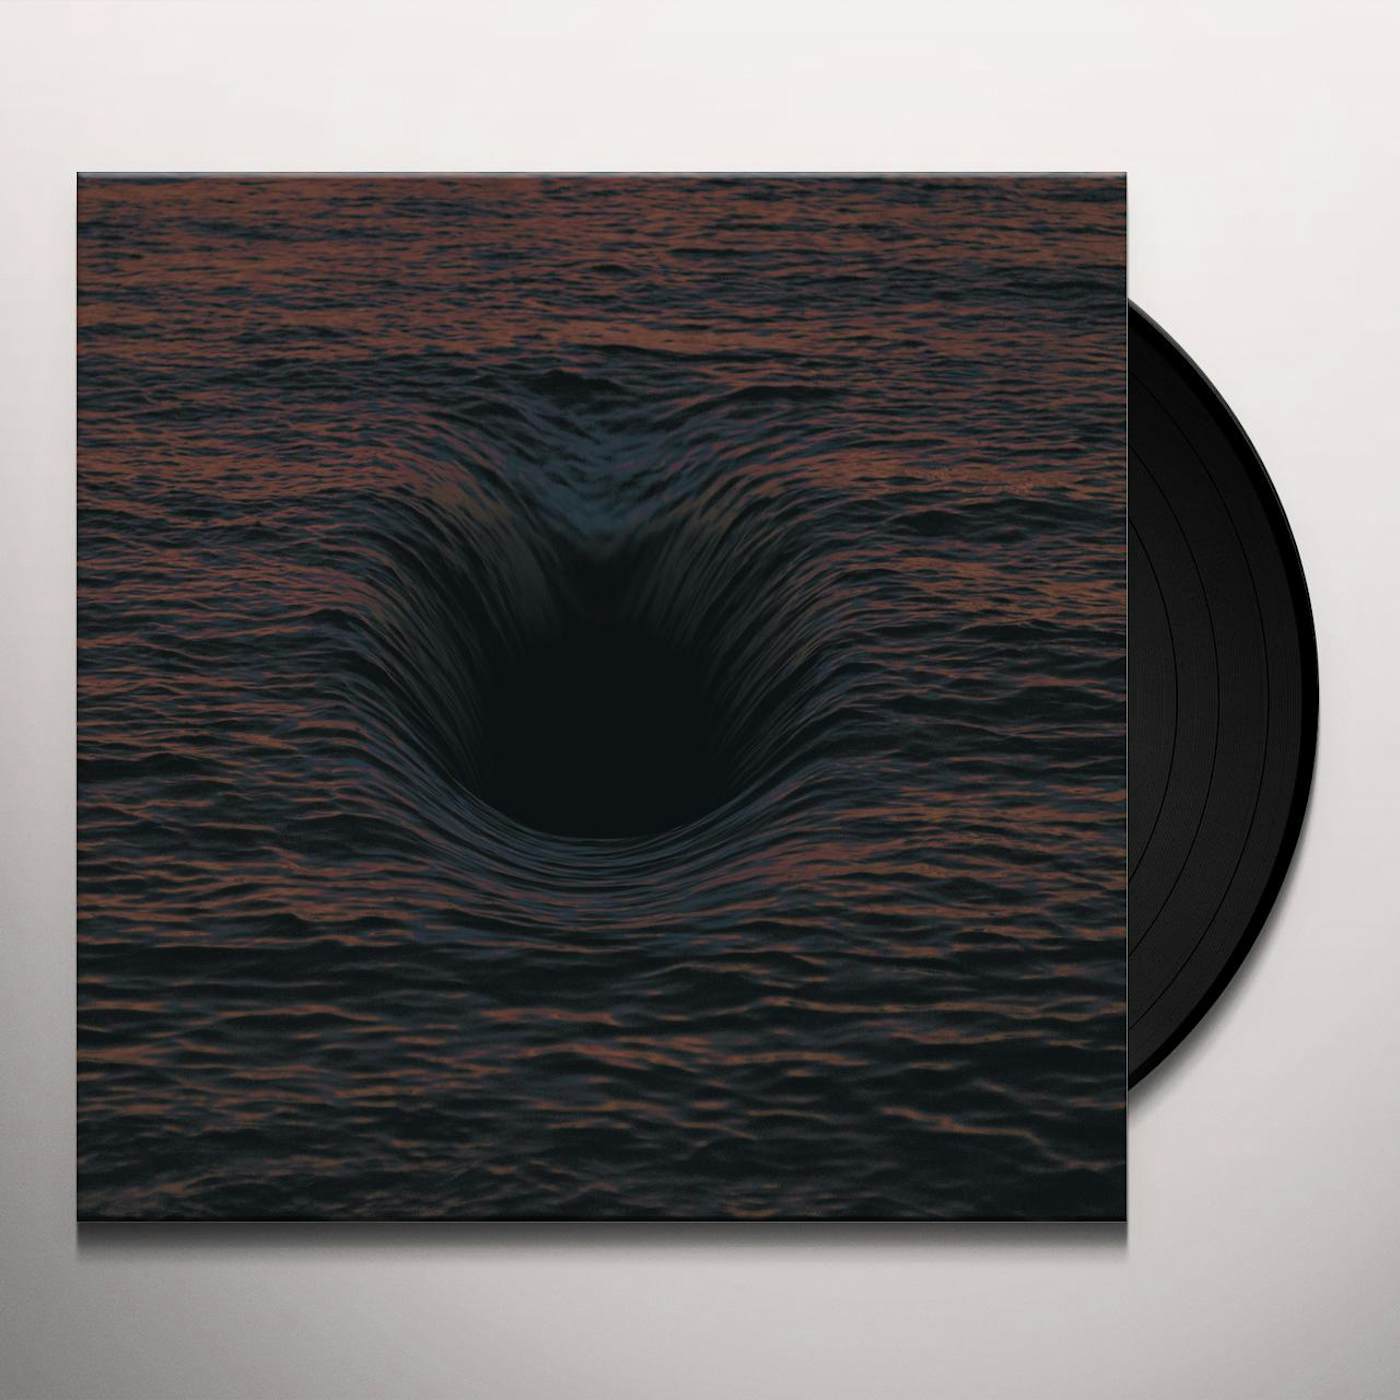 Ritual Howls Into the Water Vinyl Record